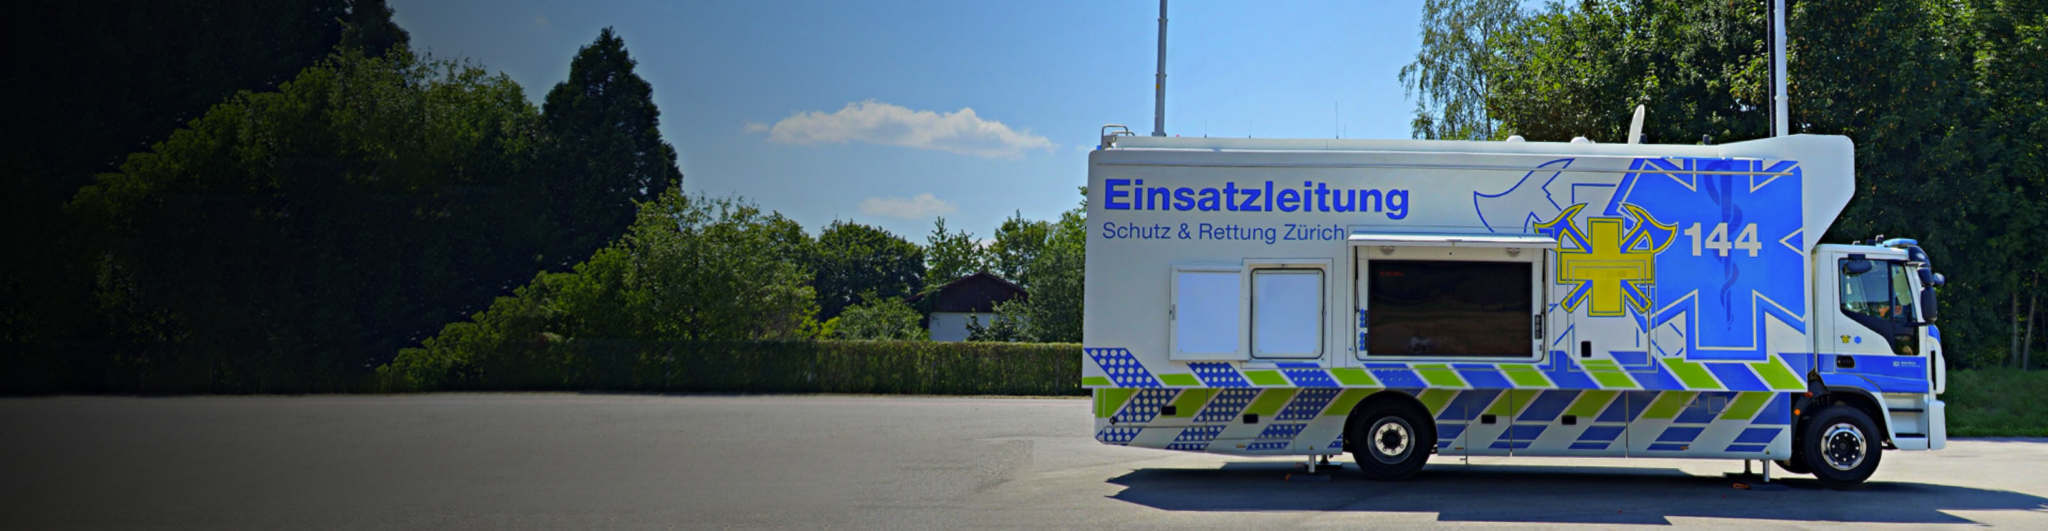 Mobile Command Center for Protection & Rescue Zurich Locks In Secure Connectivity